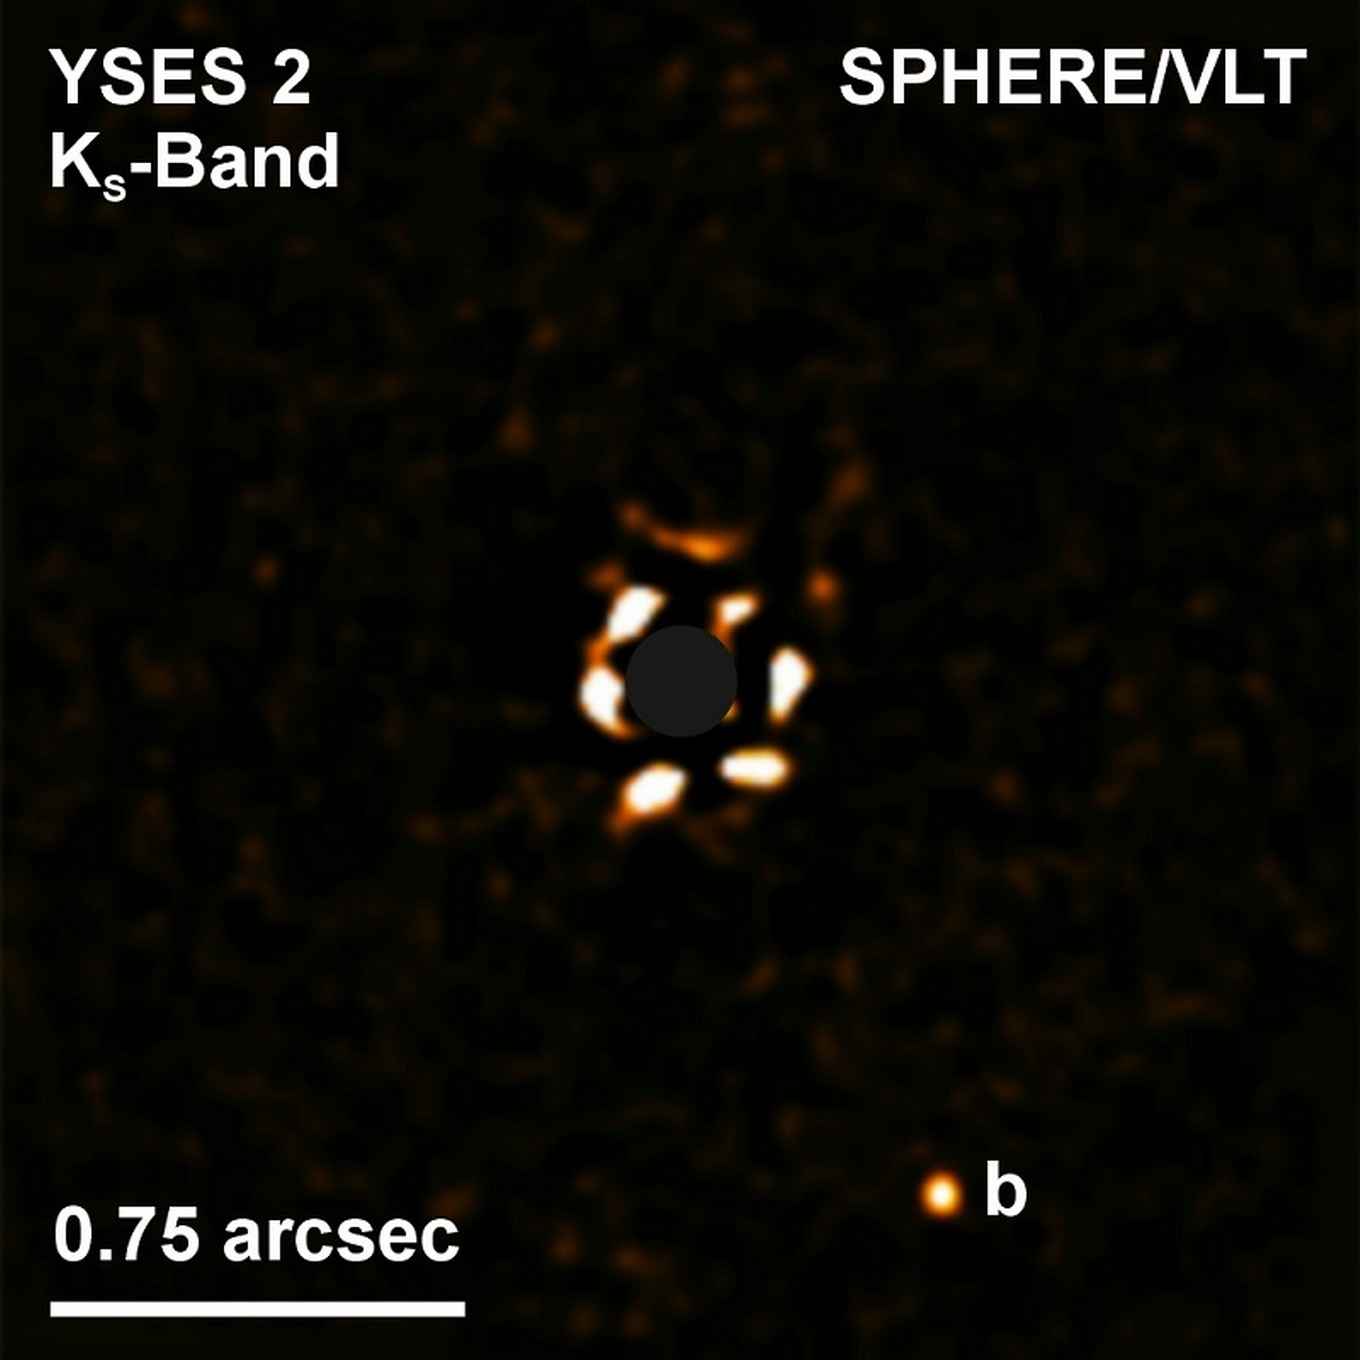 A direct image of the exoplanet YSES 2b (bottom right) and its star (centre). The star is blocked by a so-called coronagraph.